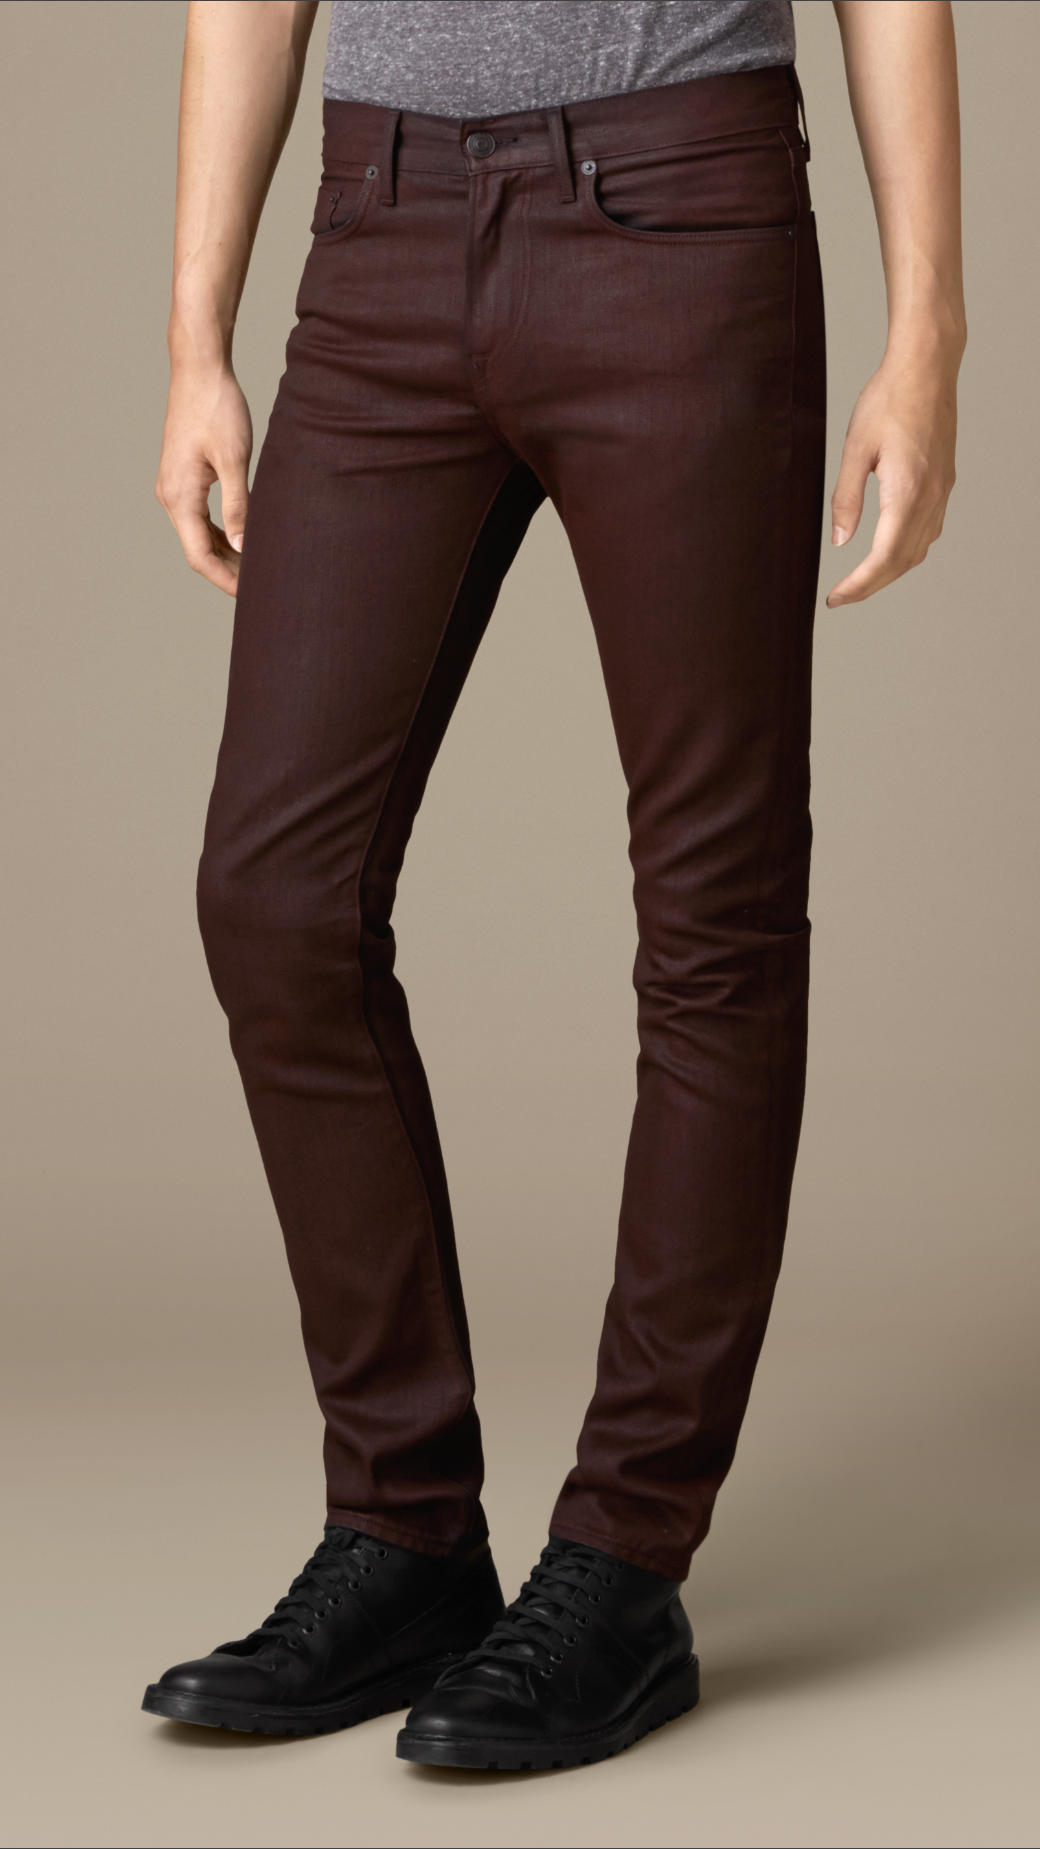 Lyst - Burberry Slim Fit Hand-Sprayed Jeans in Brown for Men